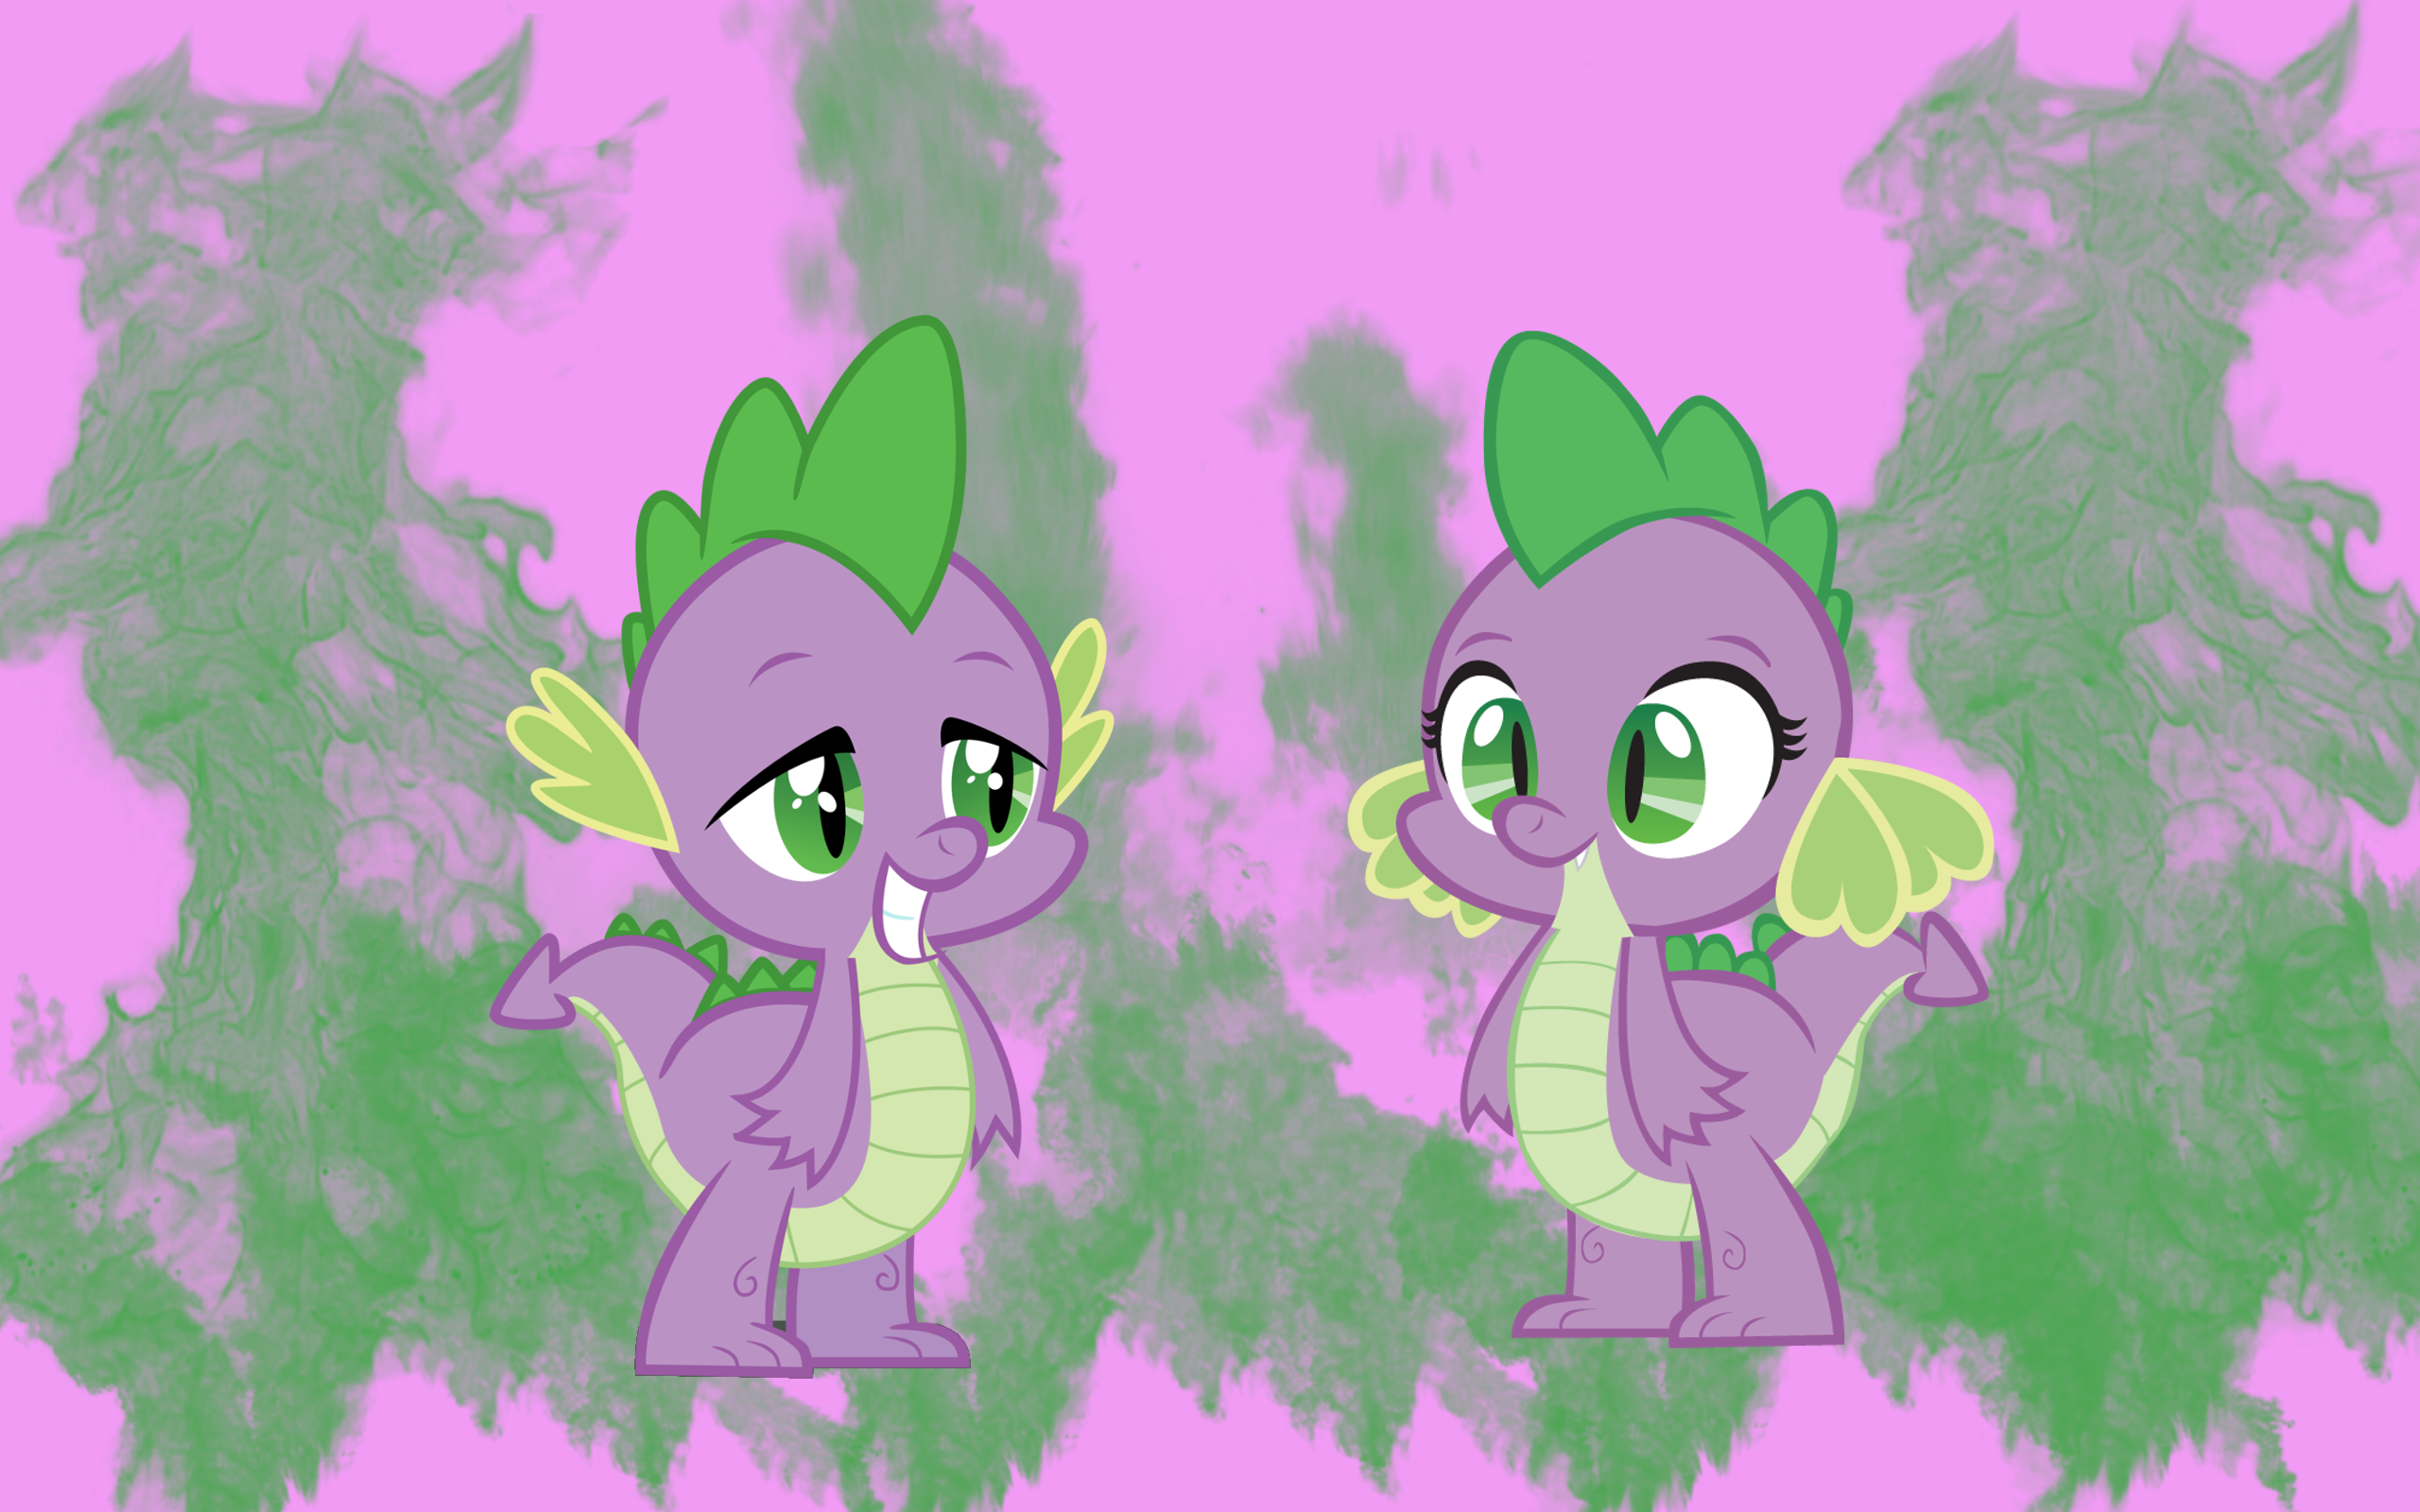 Spike and Barbara WP by AliceHumanSacrifice0, Sansbox and Trotsworth